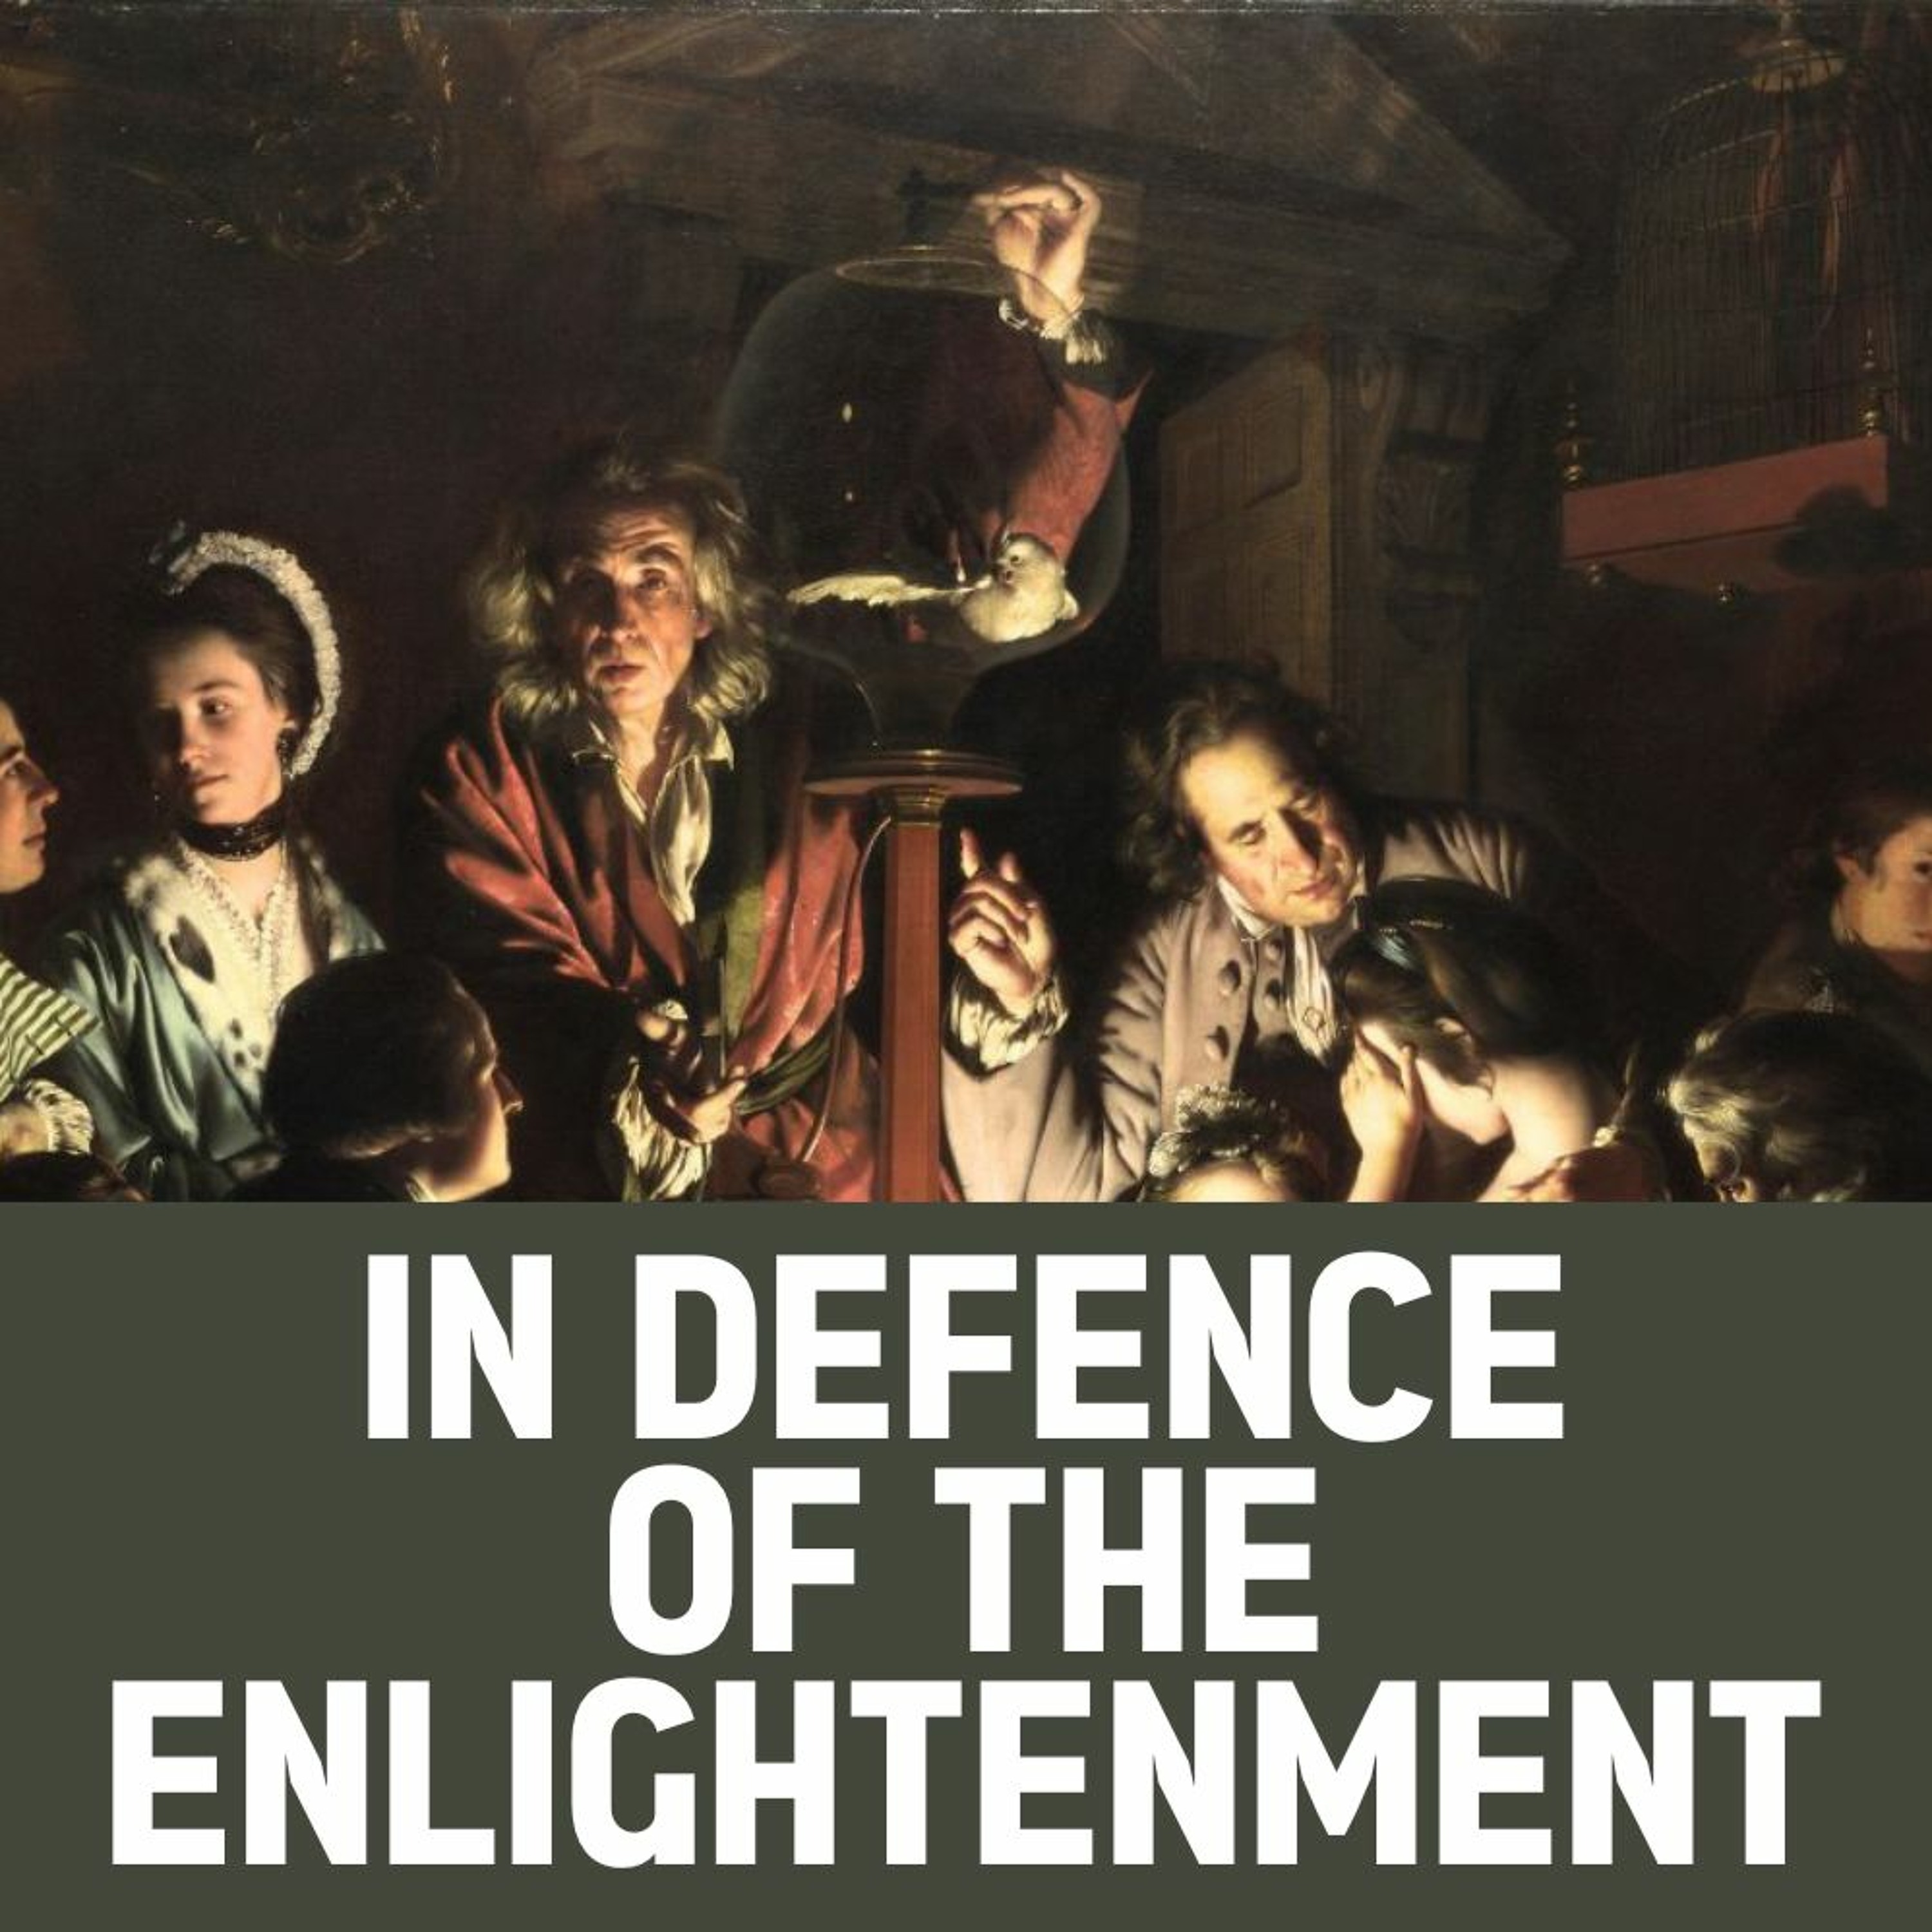 In defence of the Enlightenment